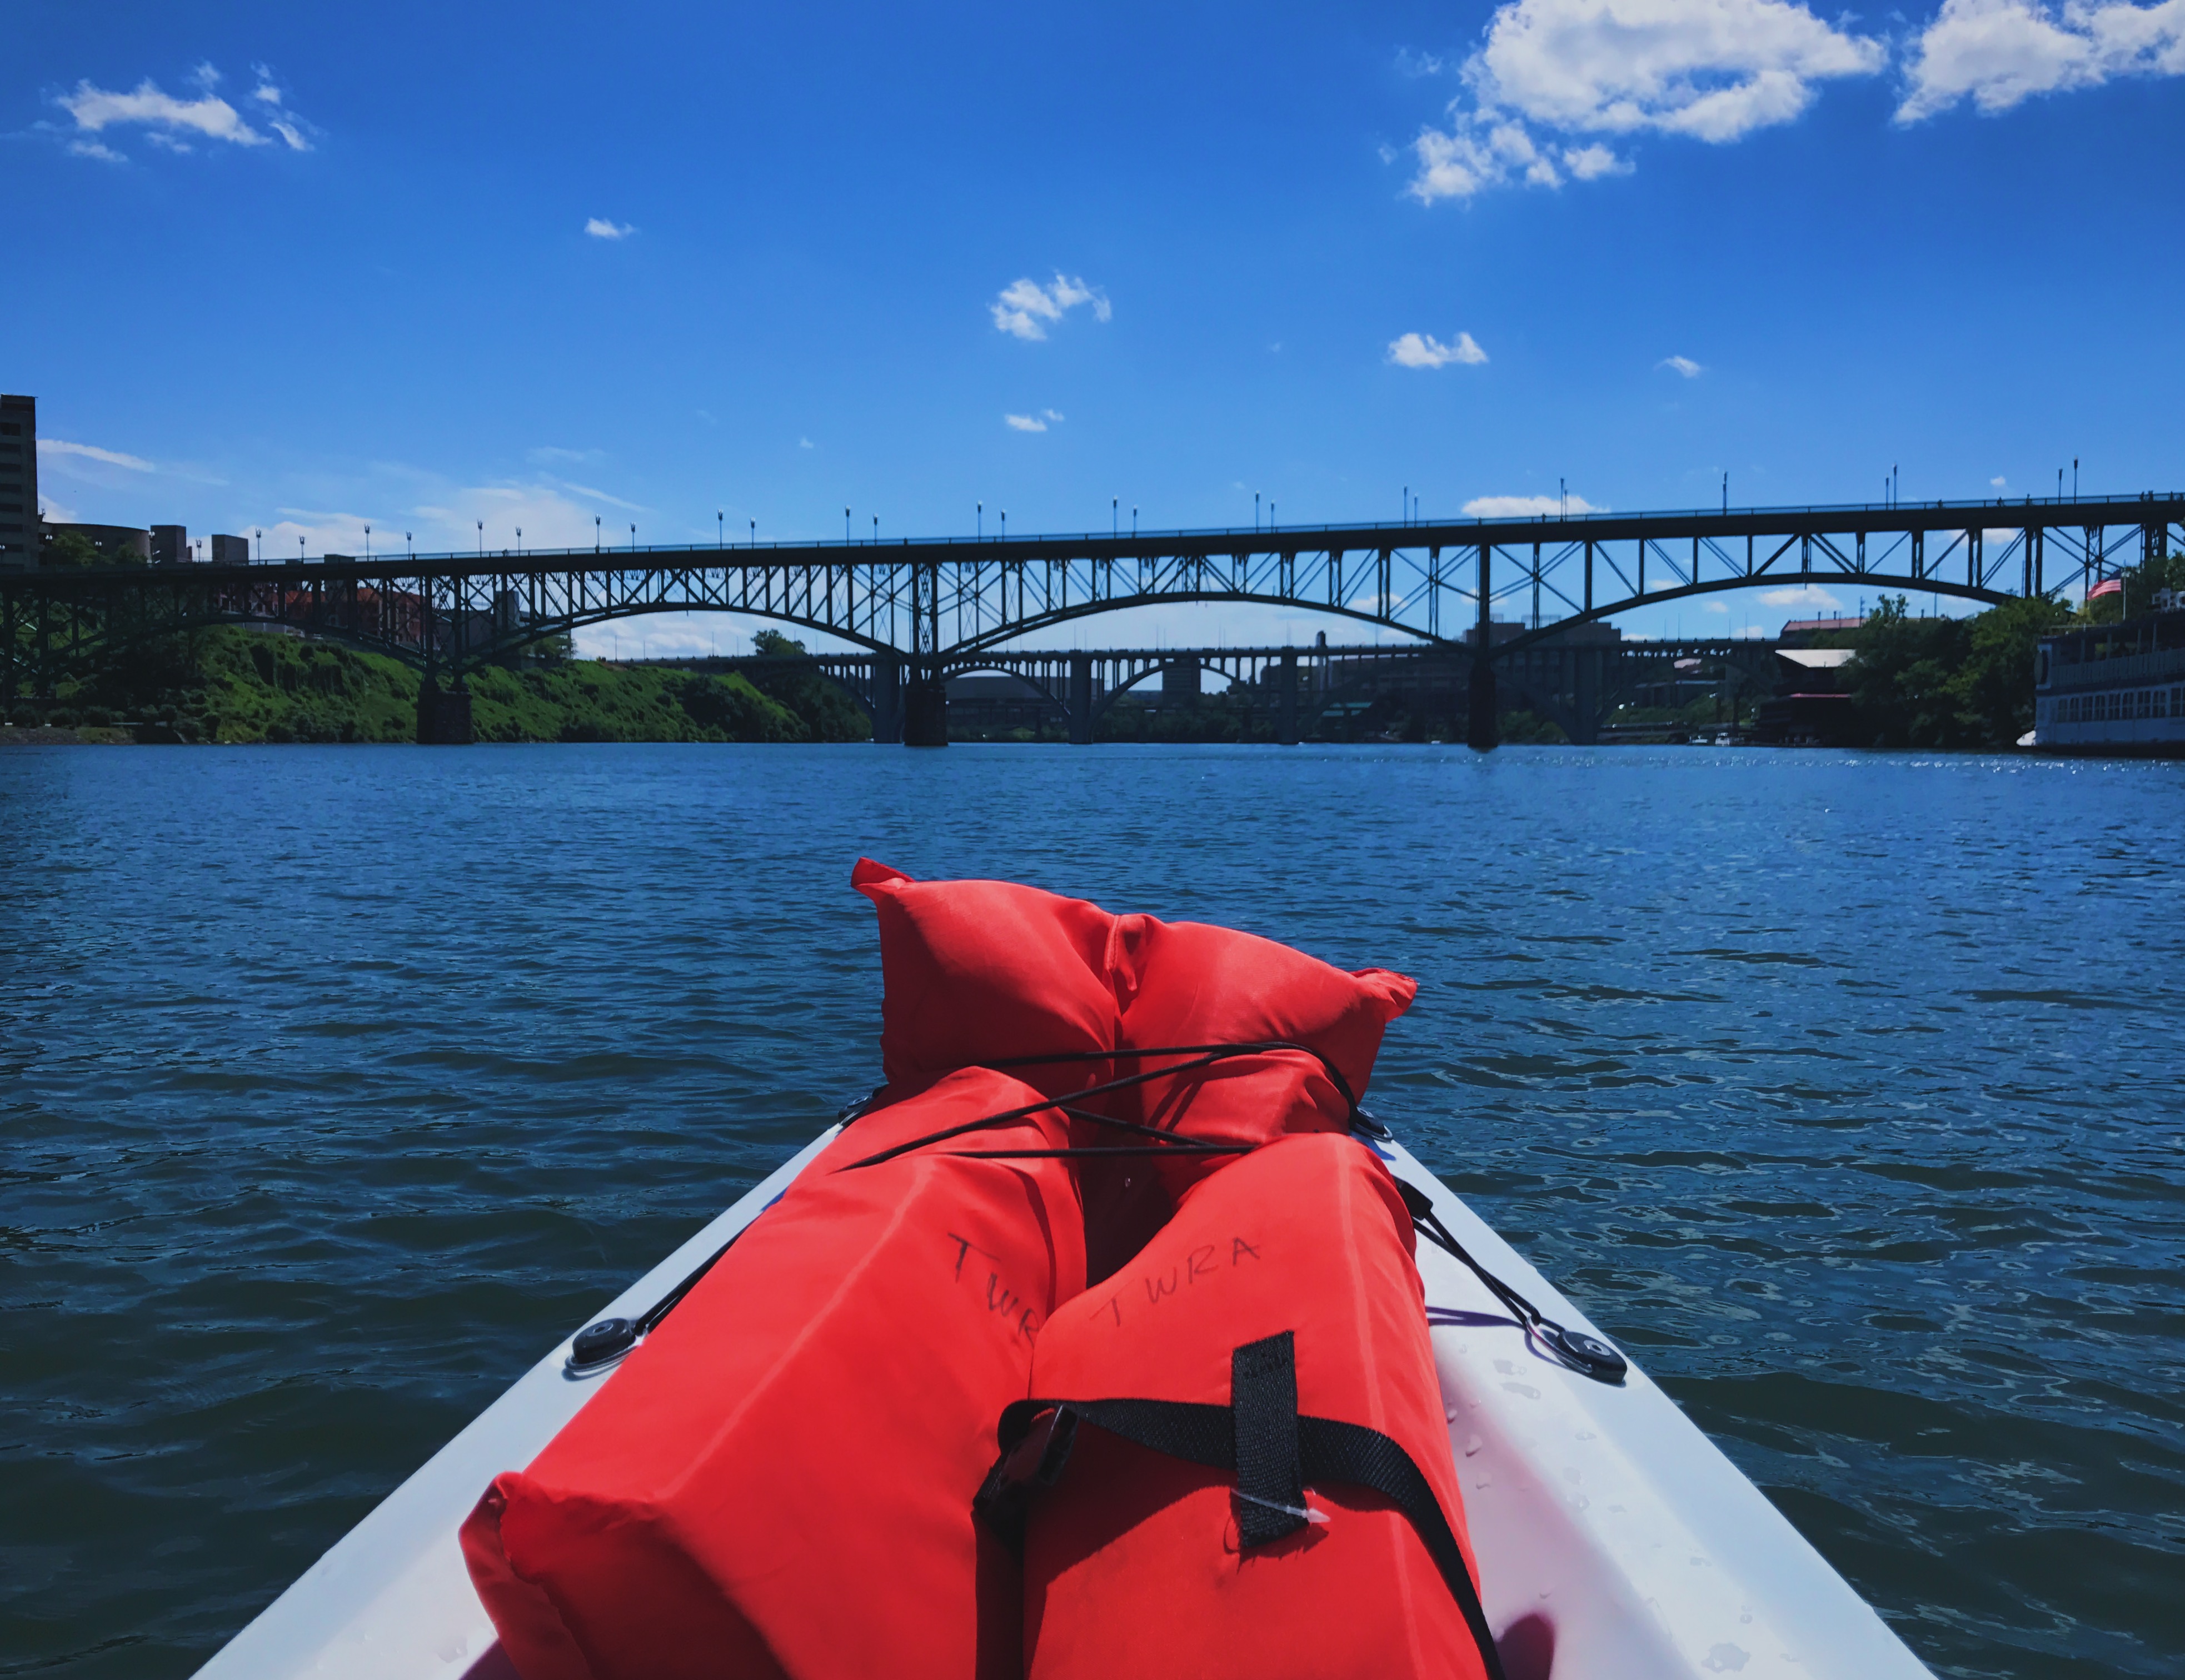 Kayaking on the Tennessee River in Knoxville